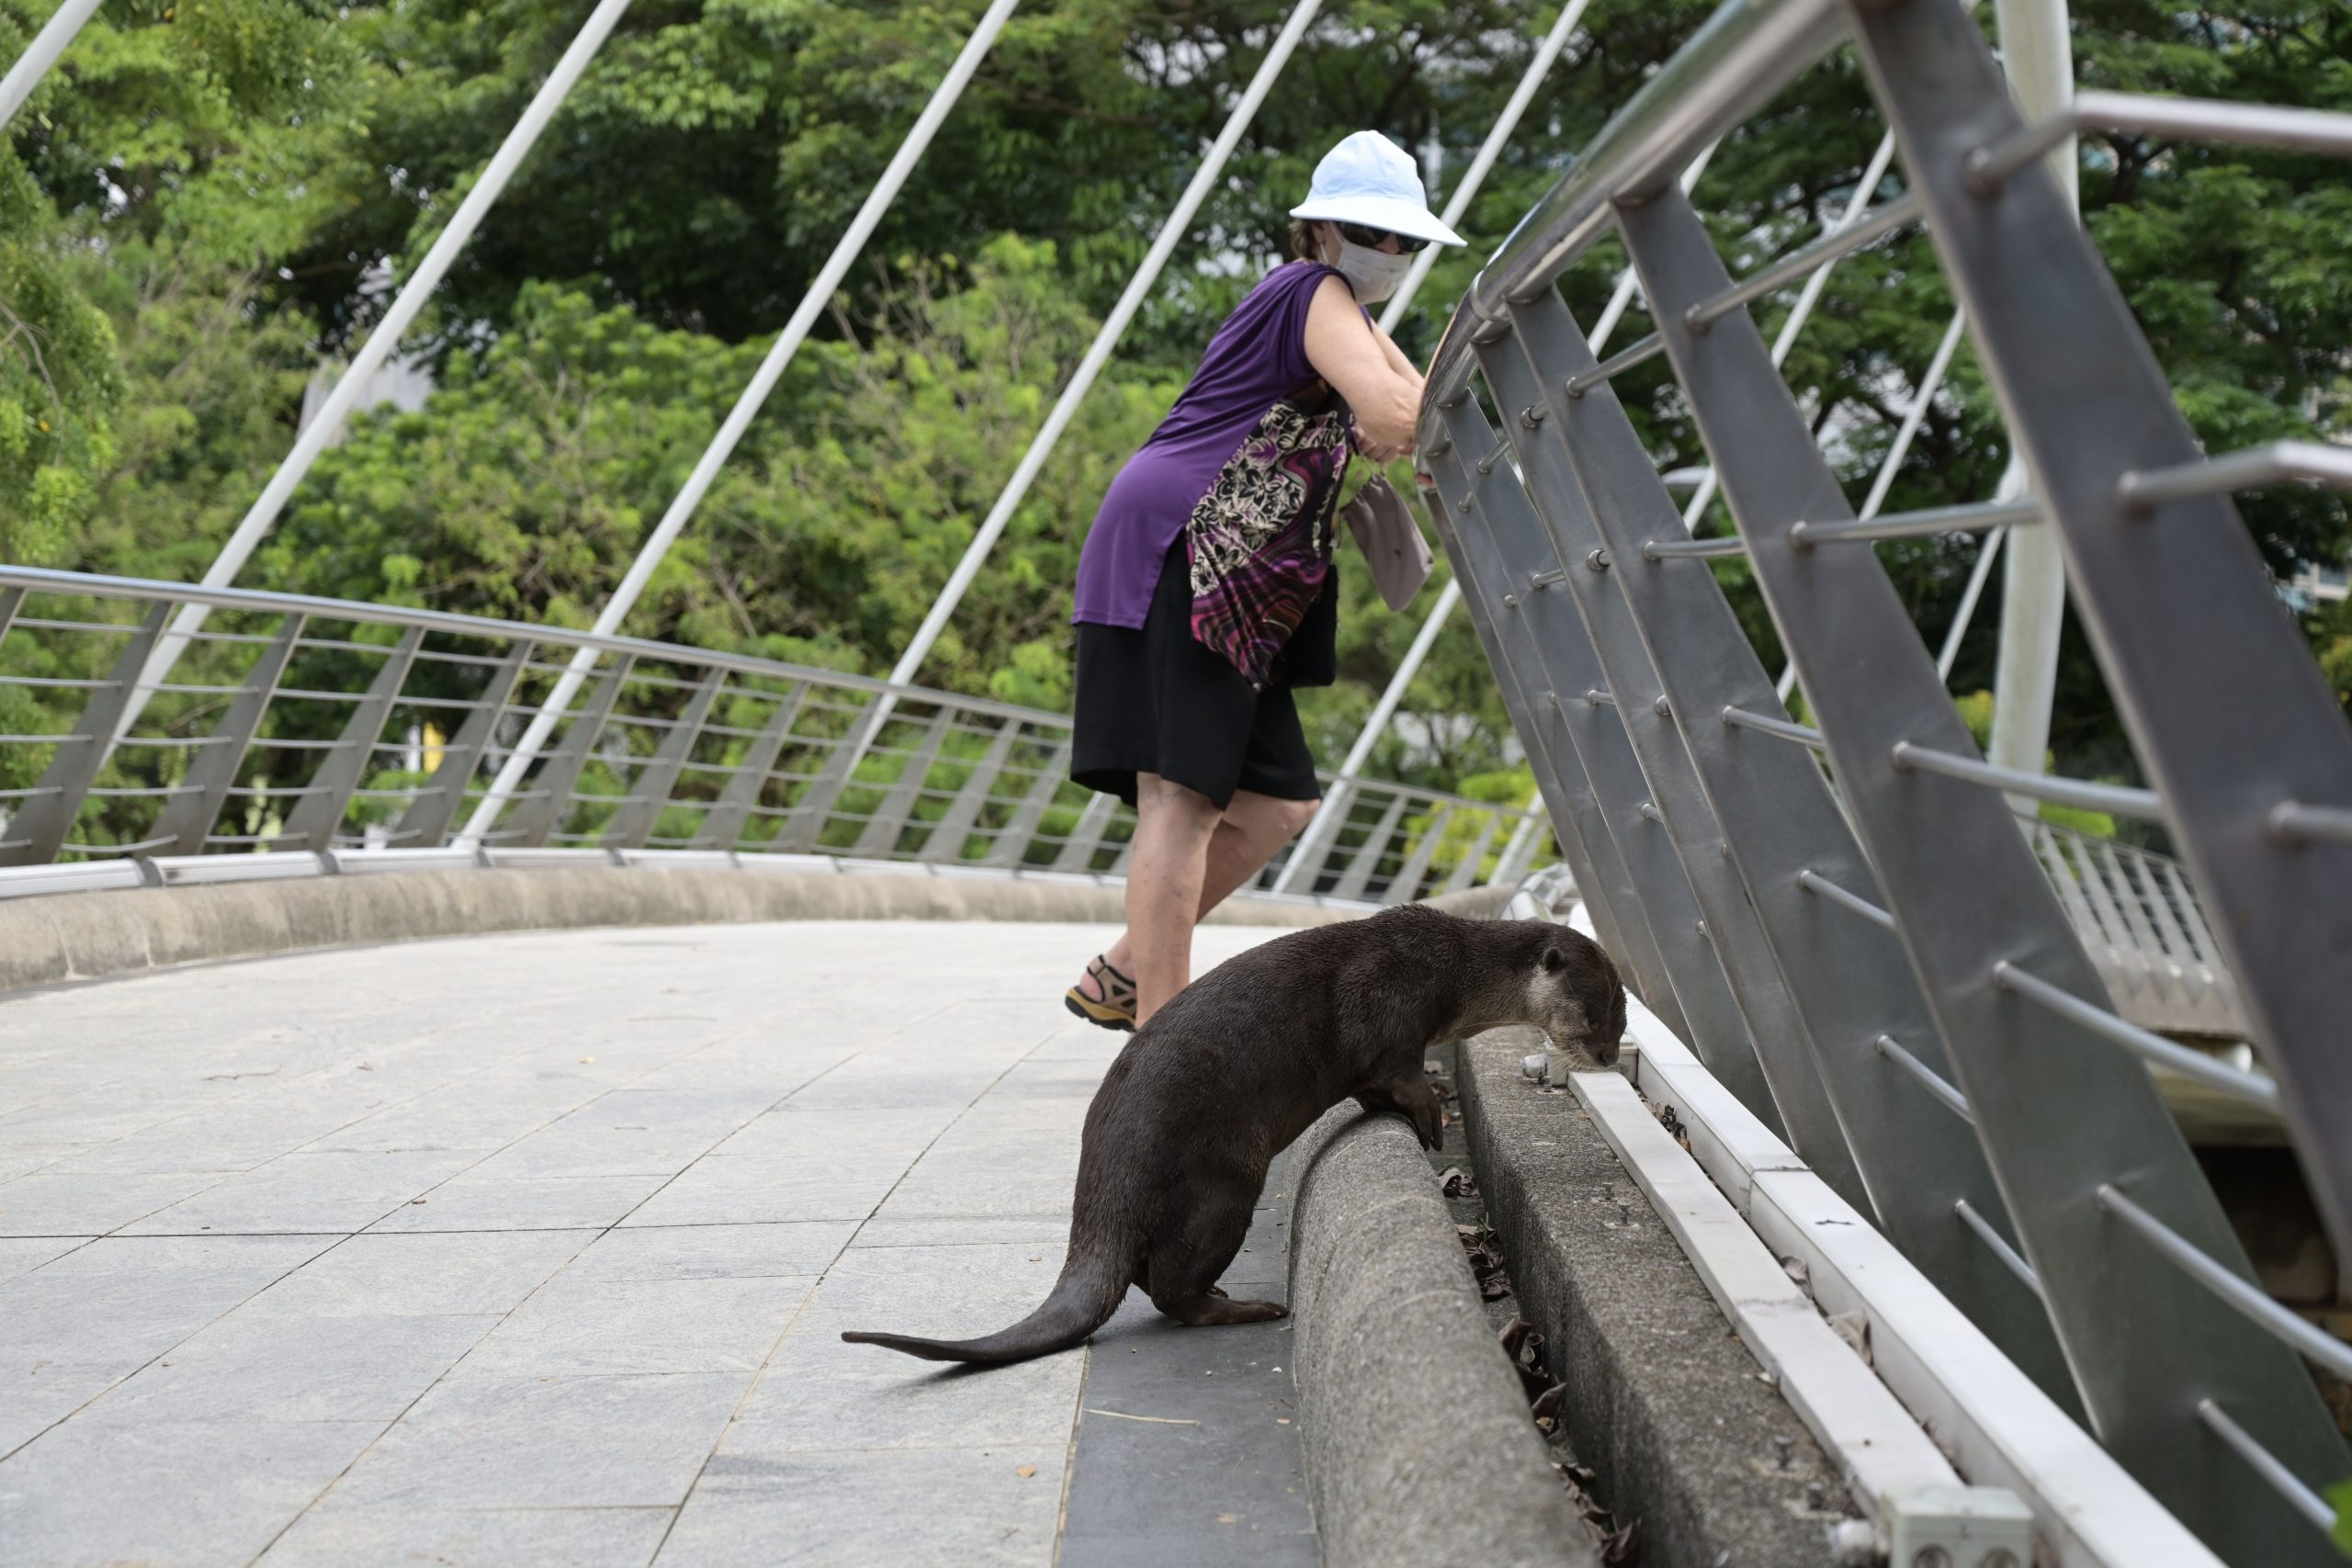 Otter peering over bridge with woman in background